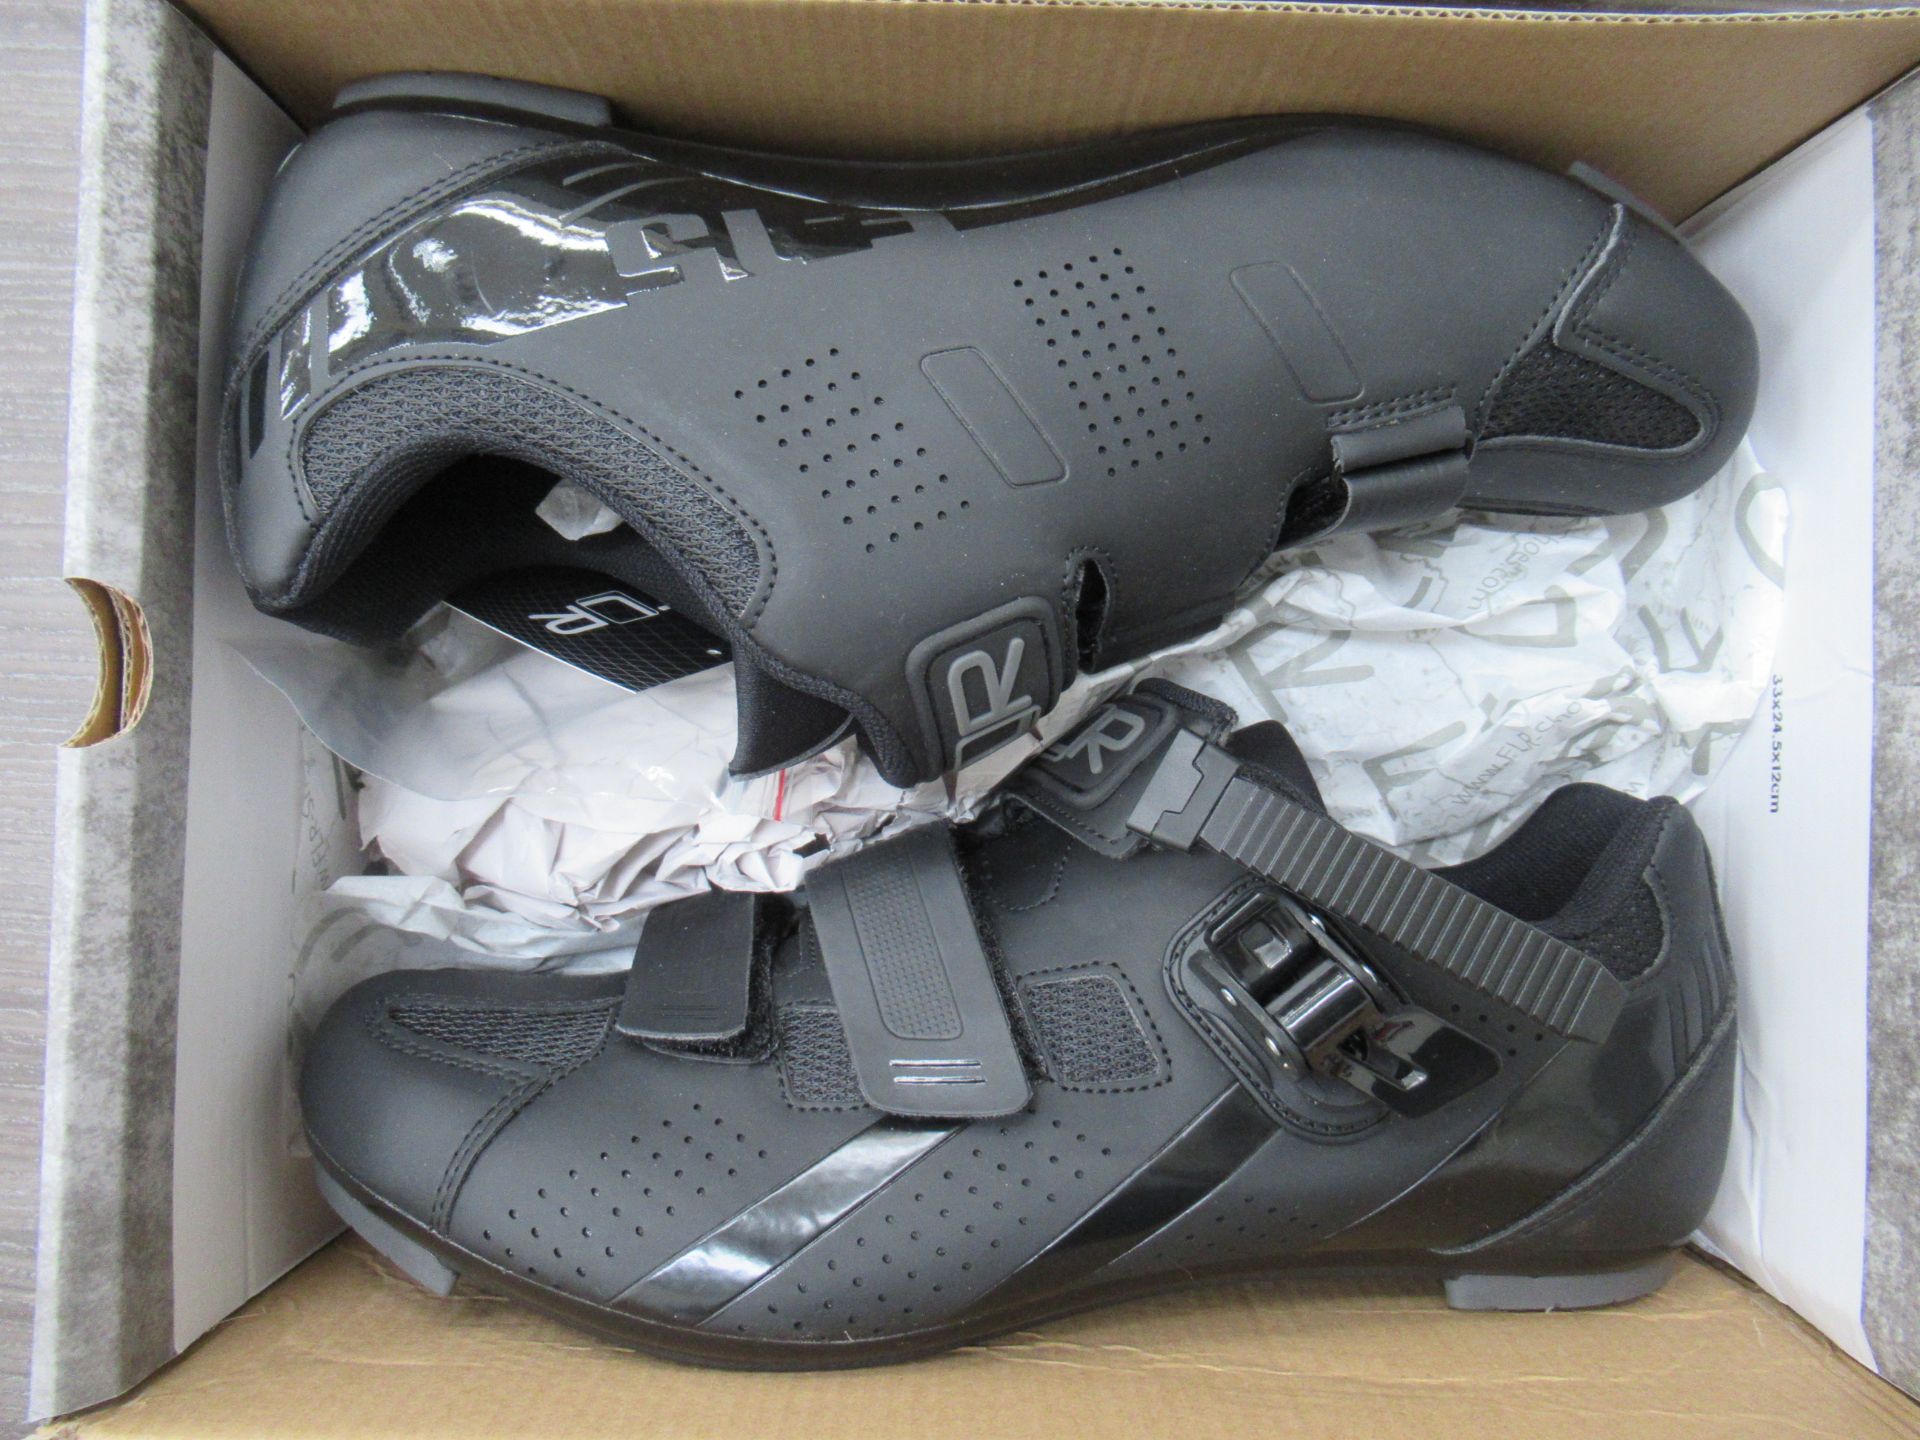 2 x Pairs of FLR cycling shoes - 1 x F-35 III boxed EU size 45 (RRP££64.99) and 1 x F-15 III boxed E - Image 6 of 7